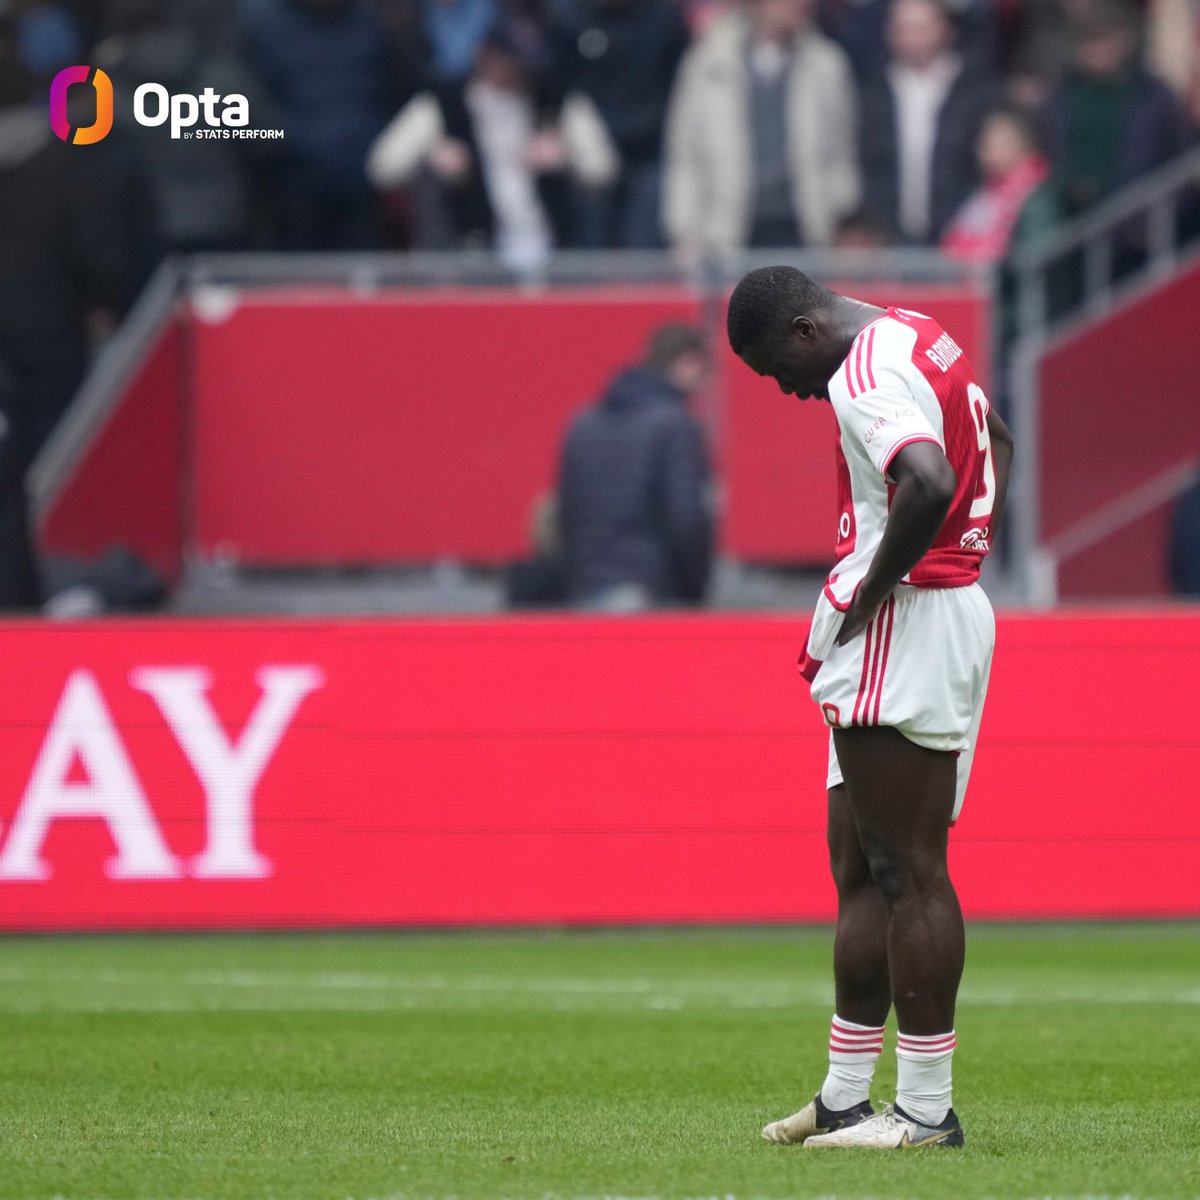 40 - @AFCAjax collected just 40 points from their first 25 @eredivisie games this season, their lowest tally at this stage of the competition since 1964-65 (33 when adjusted to three points for a win). Despair.